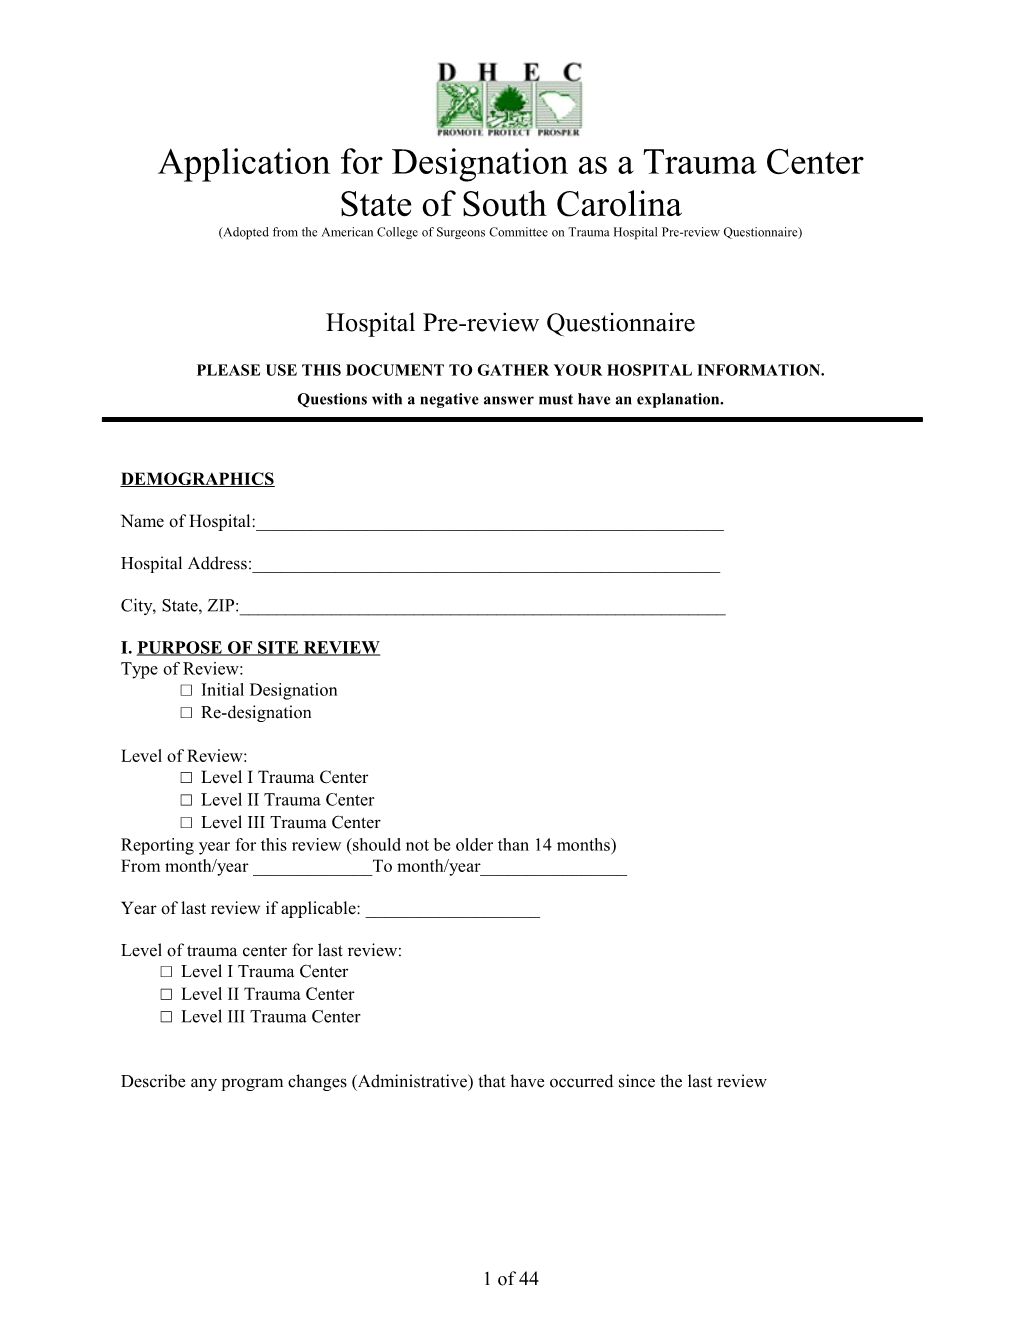 Please Use This Document to Gather Your Hospital Information